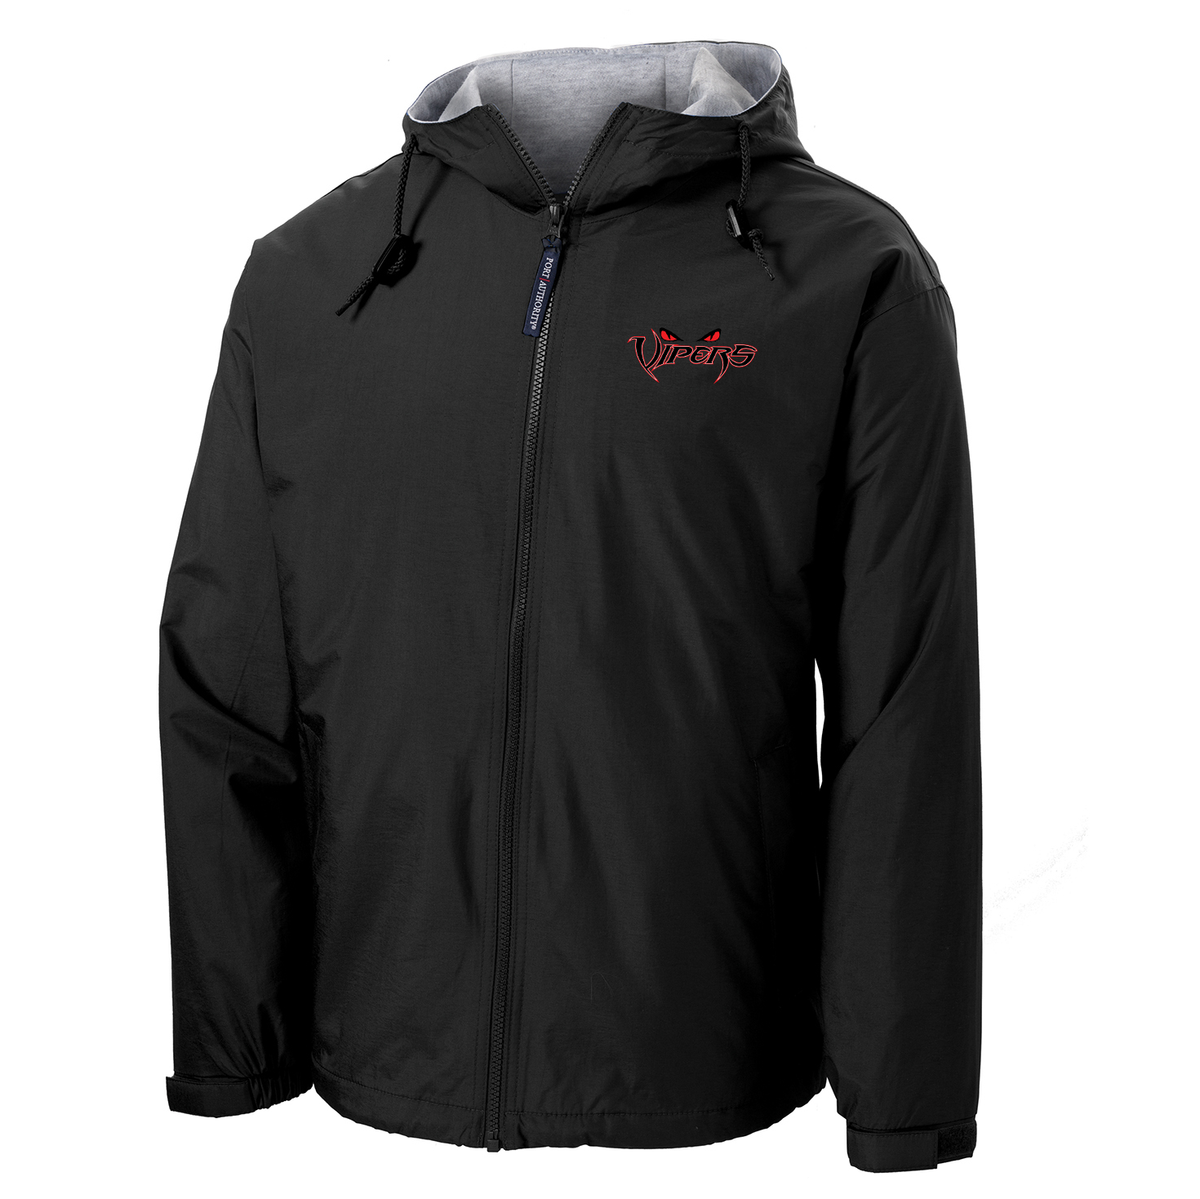 Vipers Hooded Jacket